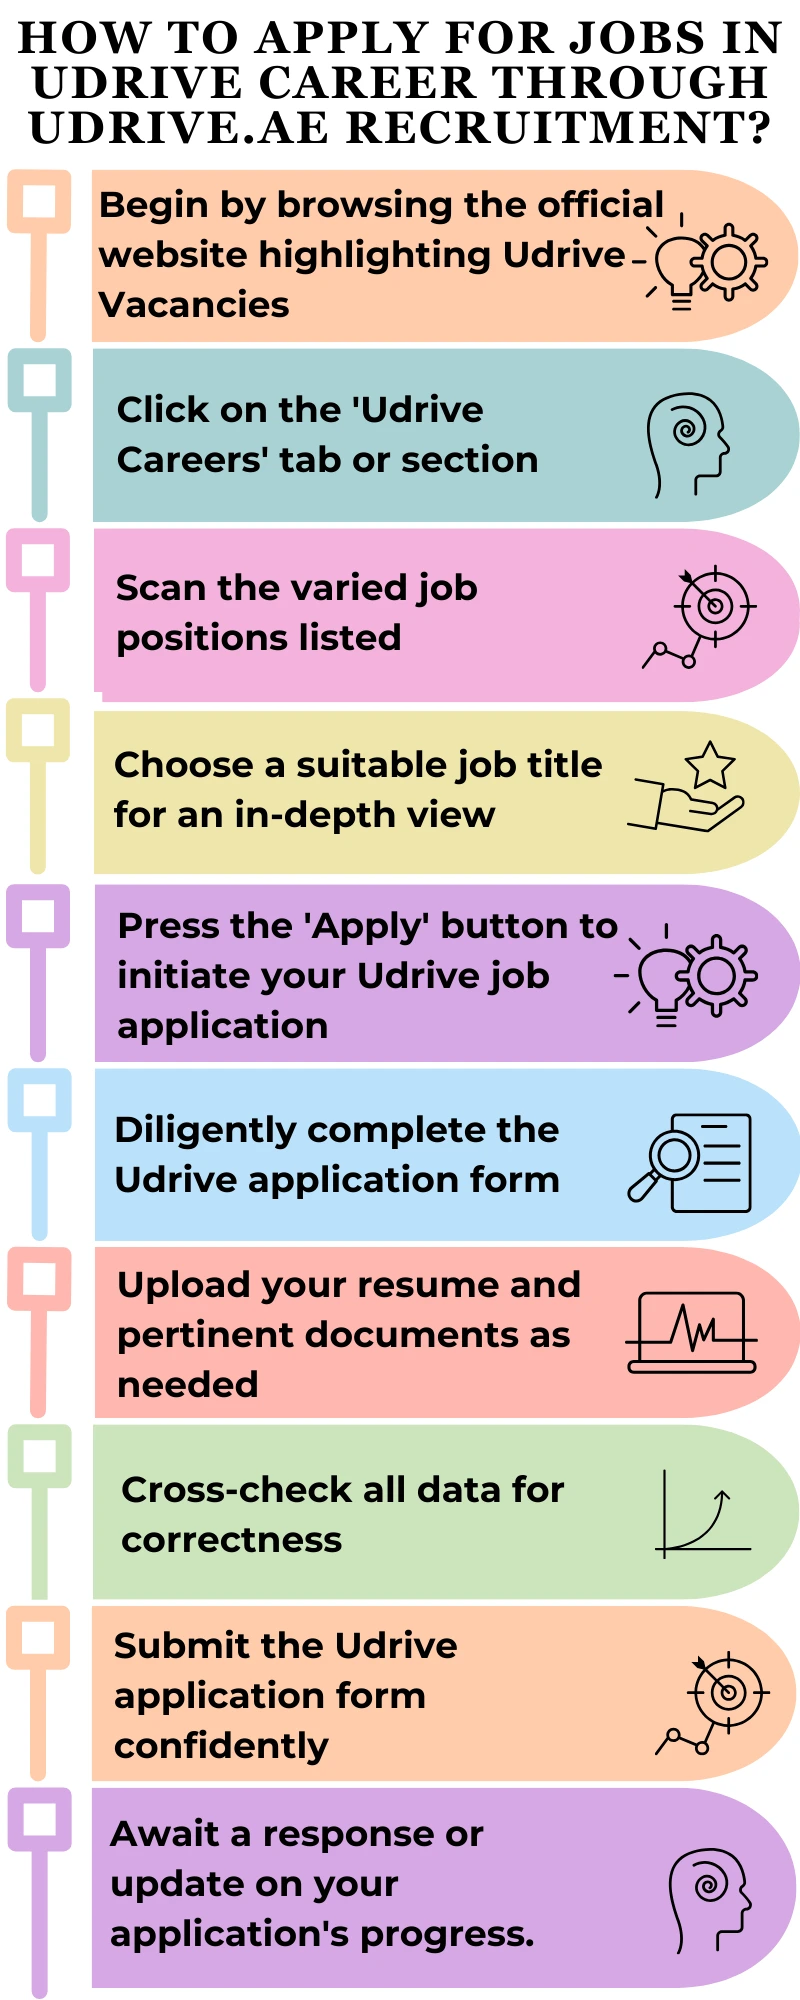 How to Apply for Jobs in Udrive Career through udrive.ae recruitment?